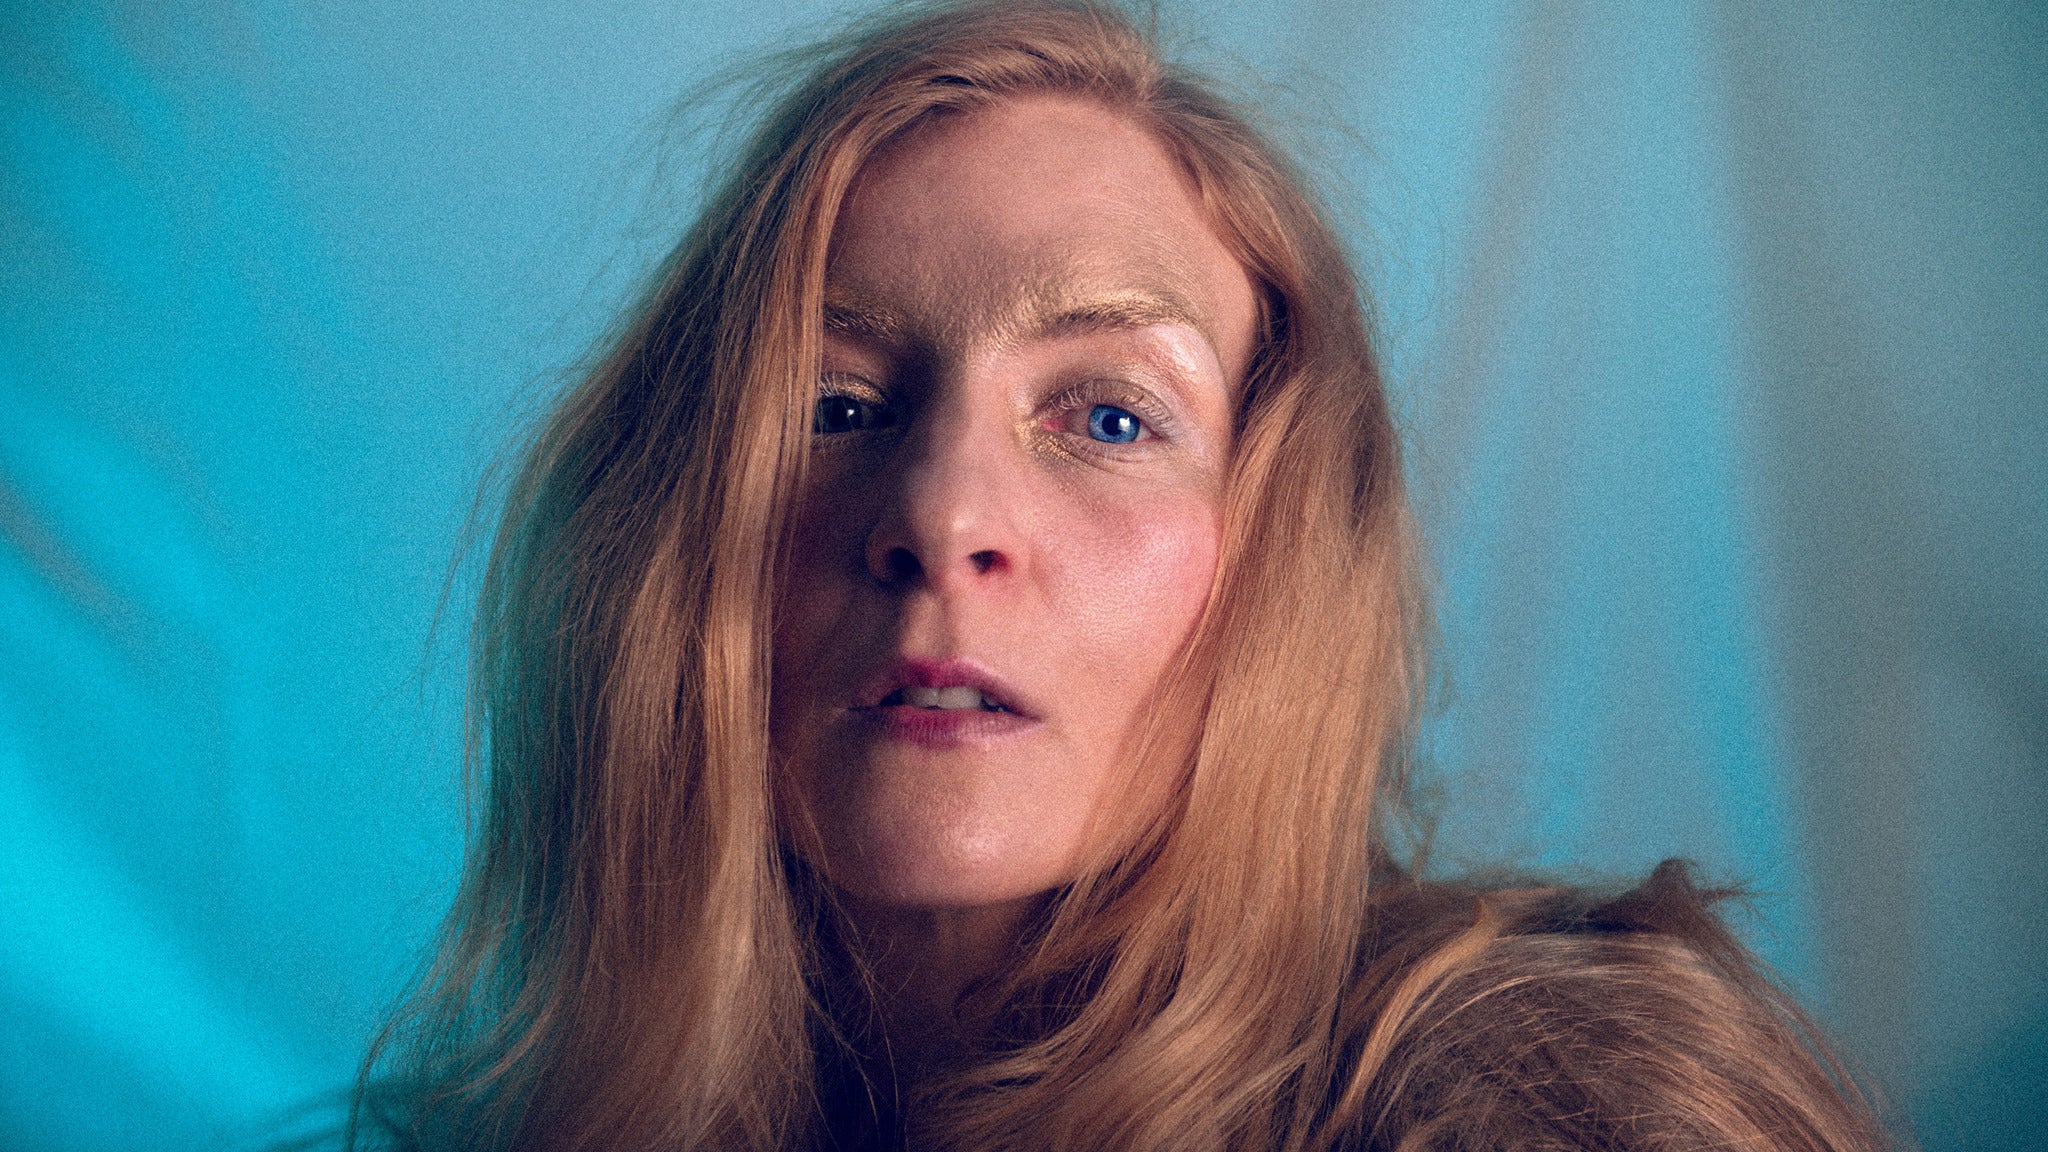 ionnalee in Minneapolis event information